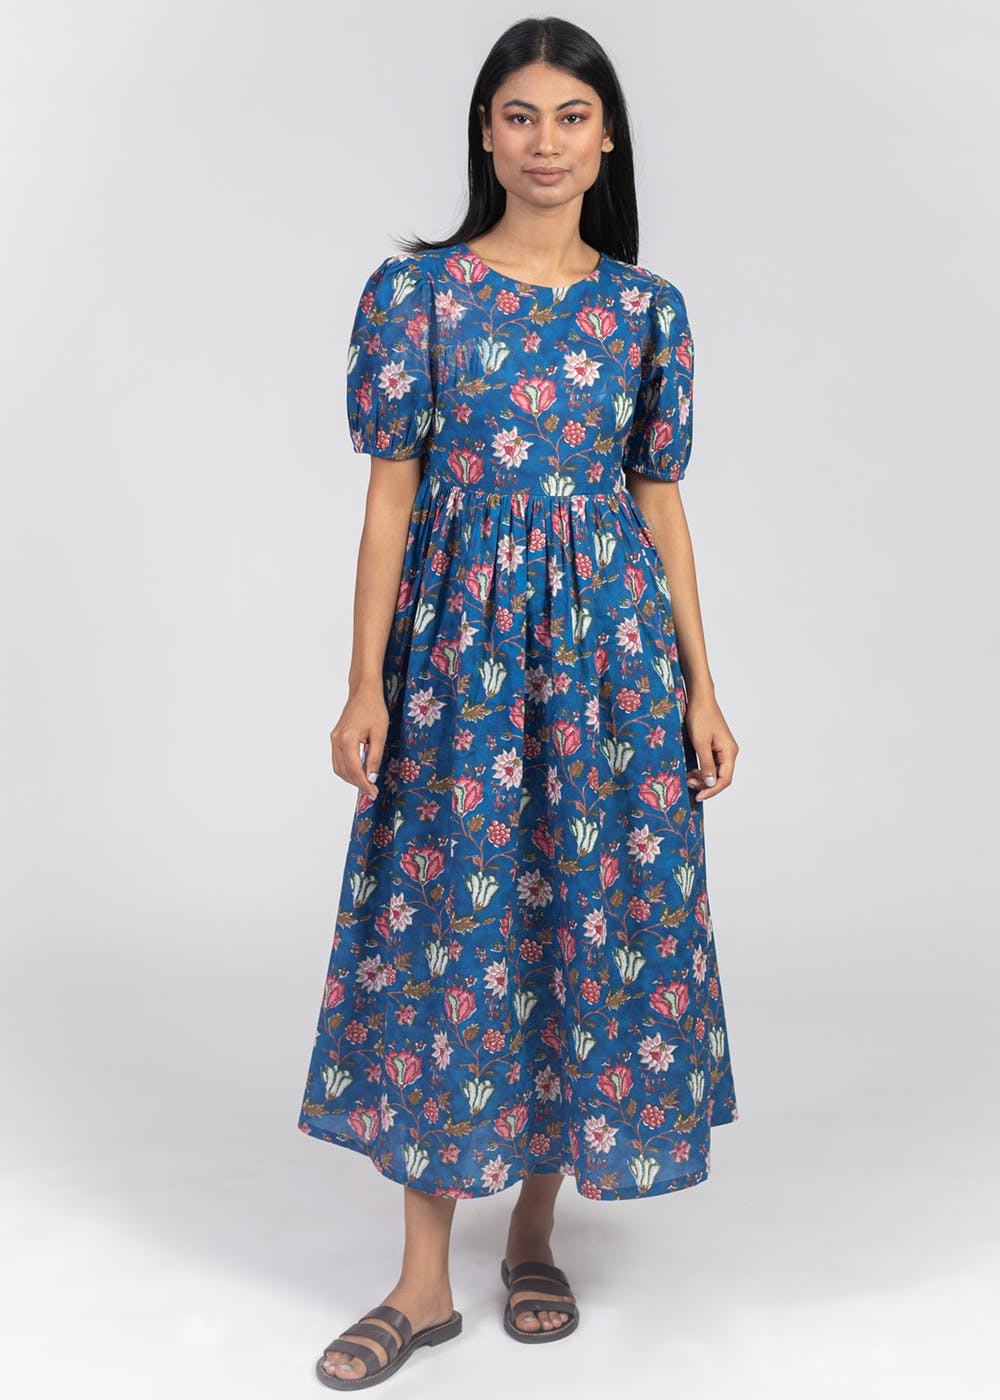 Get Blue Printed Cotton Flared Dress at ₹ 999 | LBB Shop